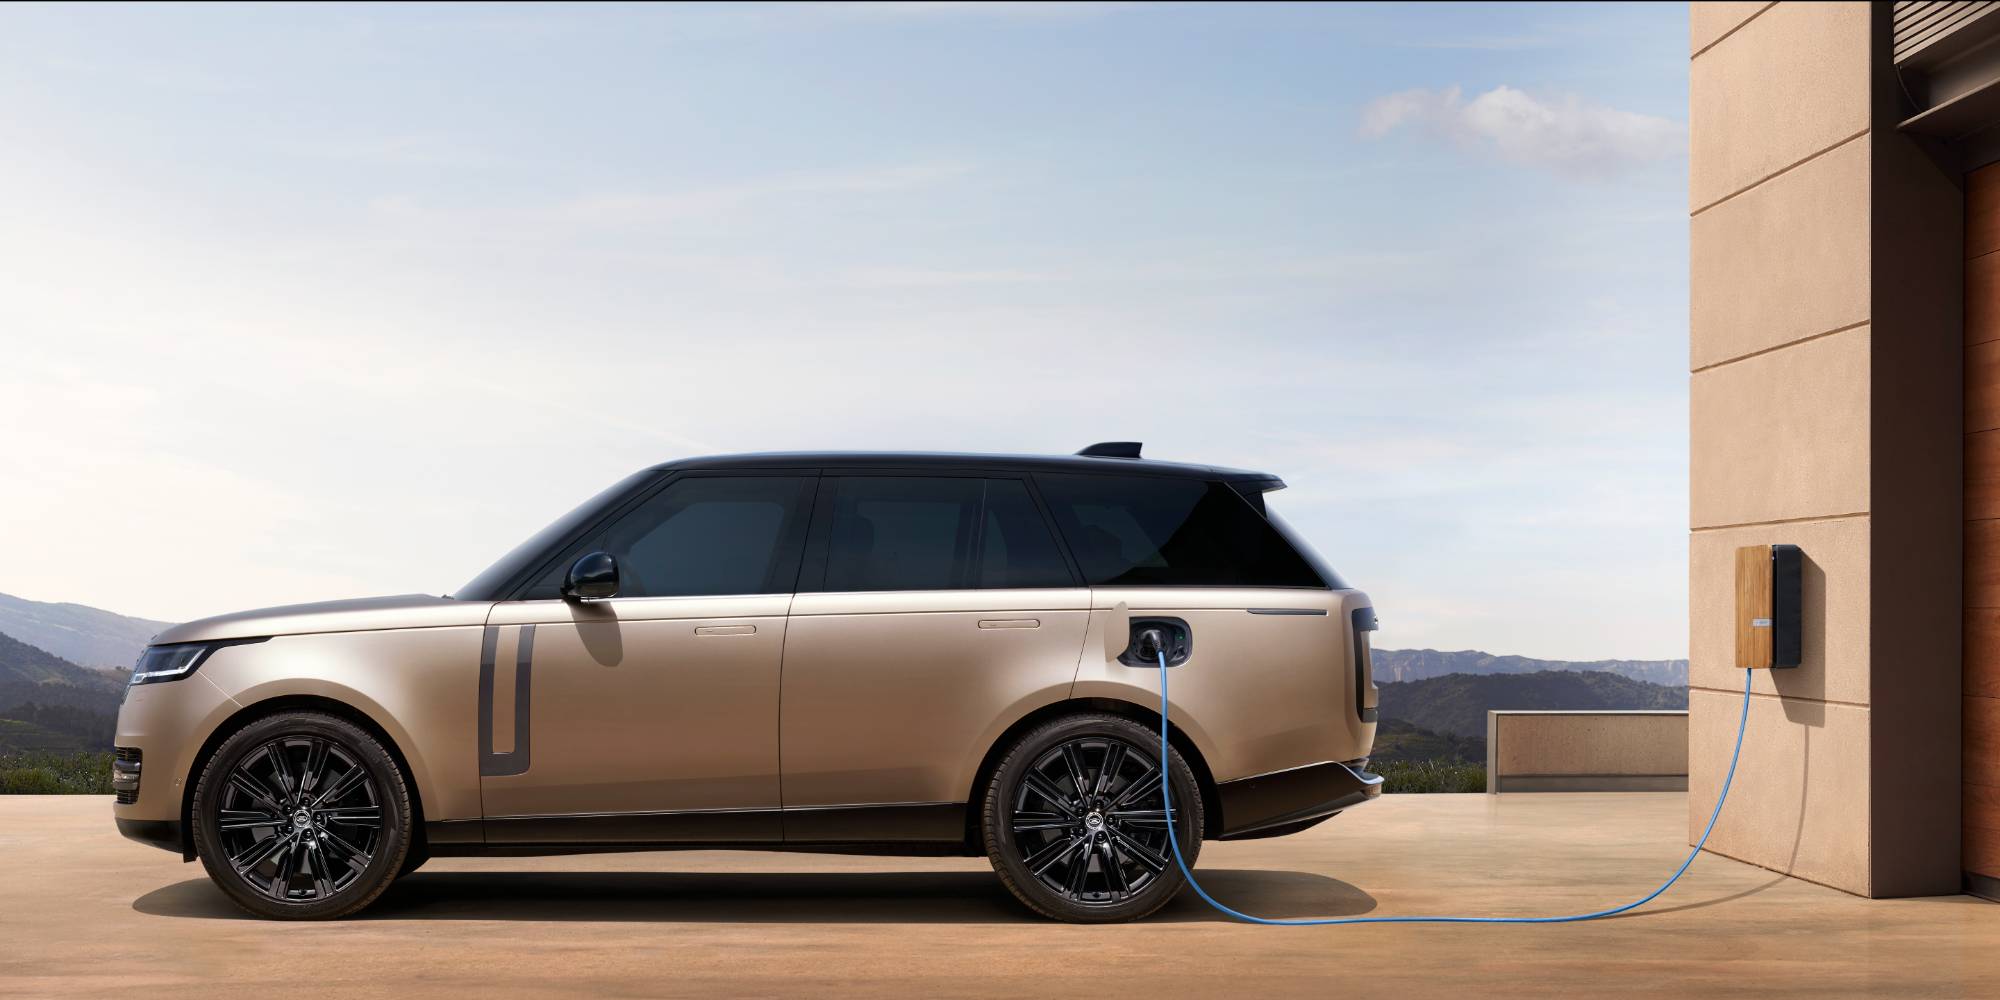 Stranden Kapel Sovereign Come and get it – order books open for new flagship Range Rover PHEV